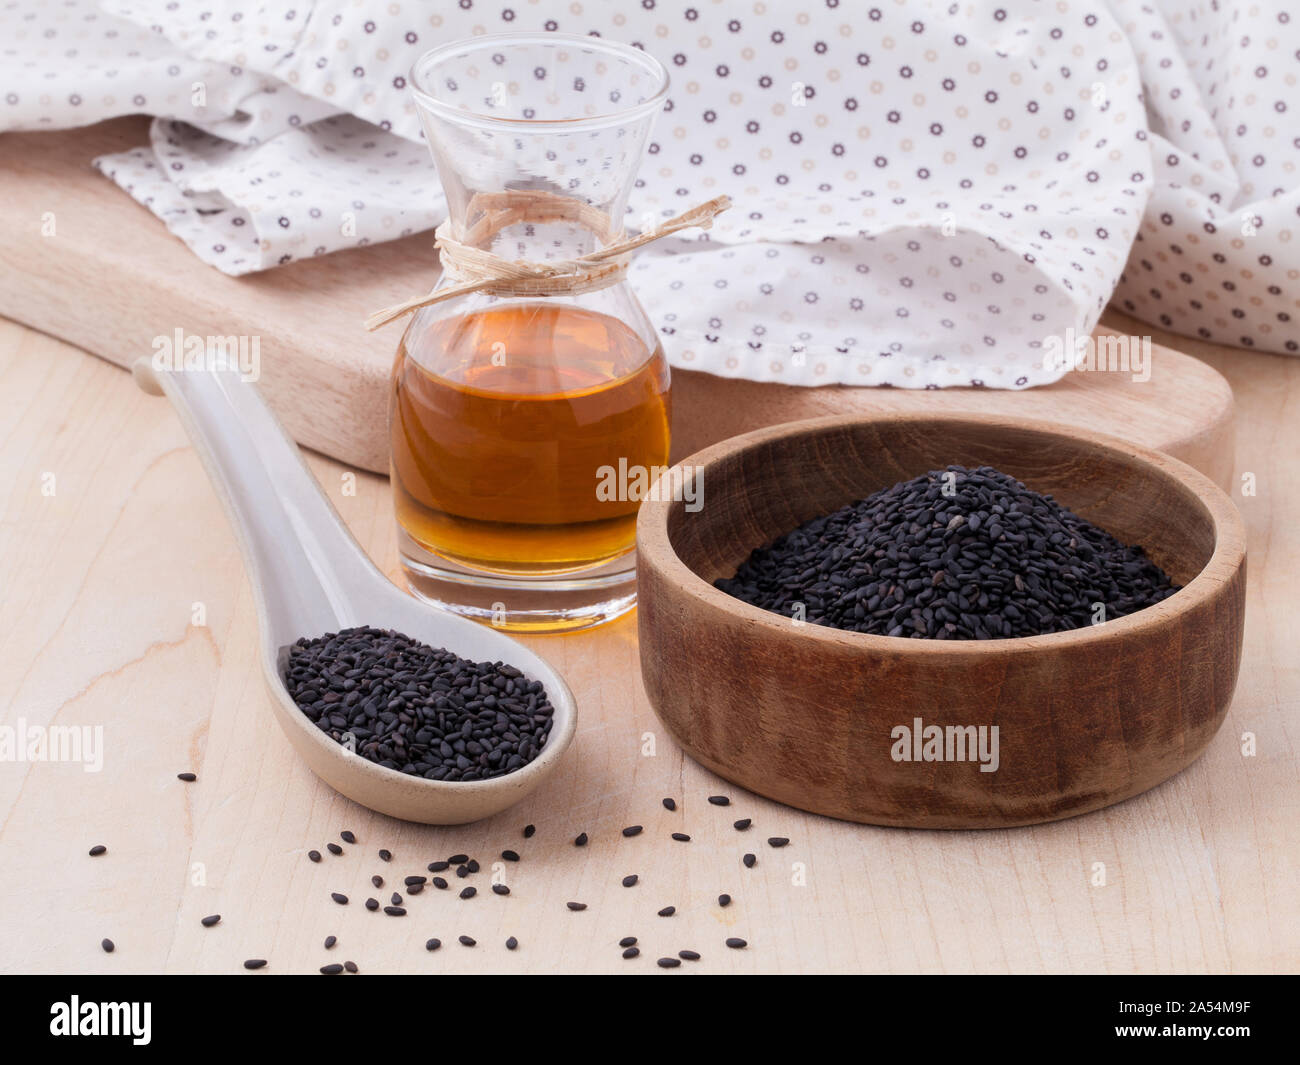 Black sesame oil and sesame seeds set up on wooden table Stock Photo